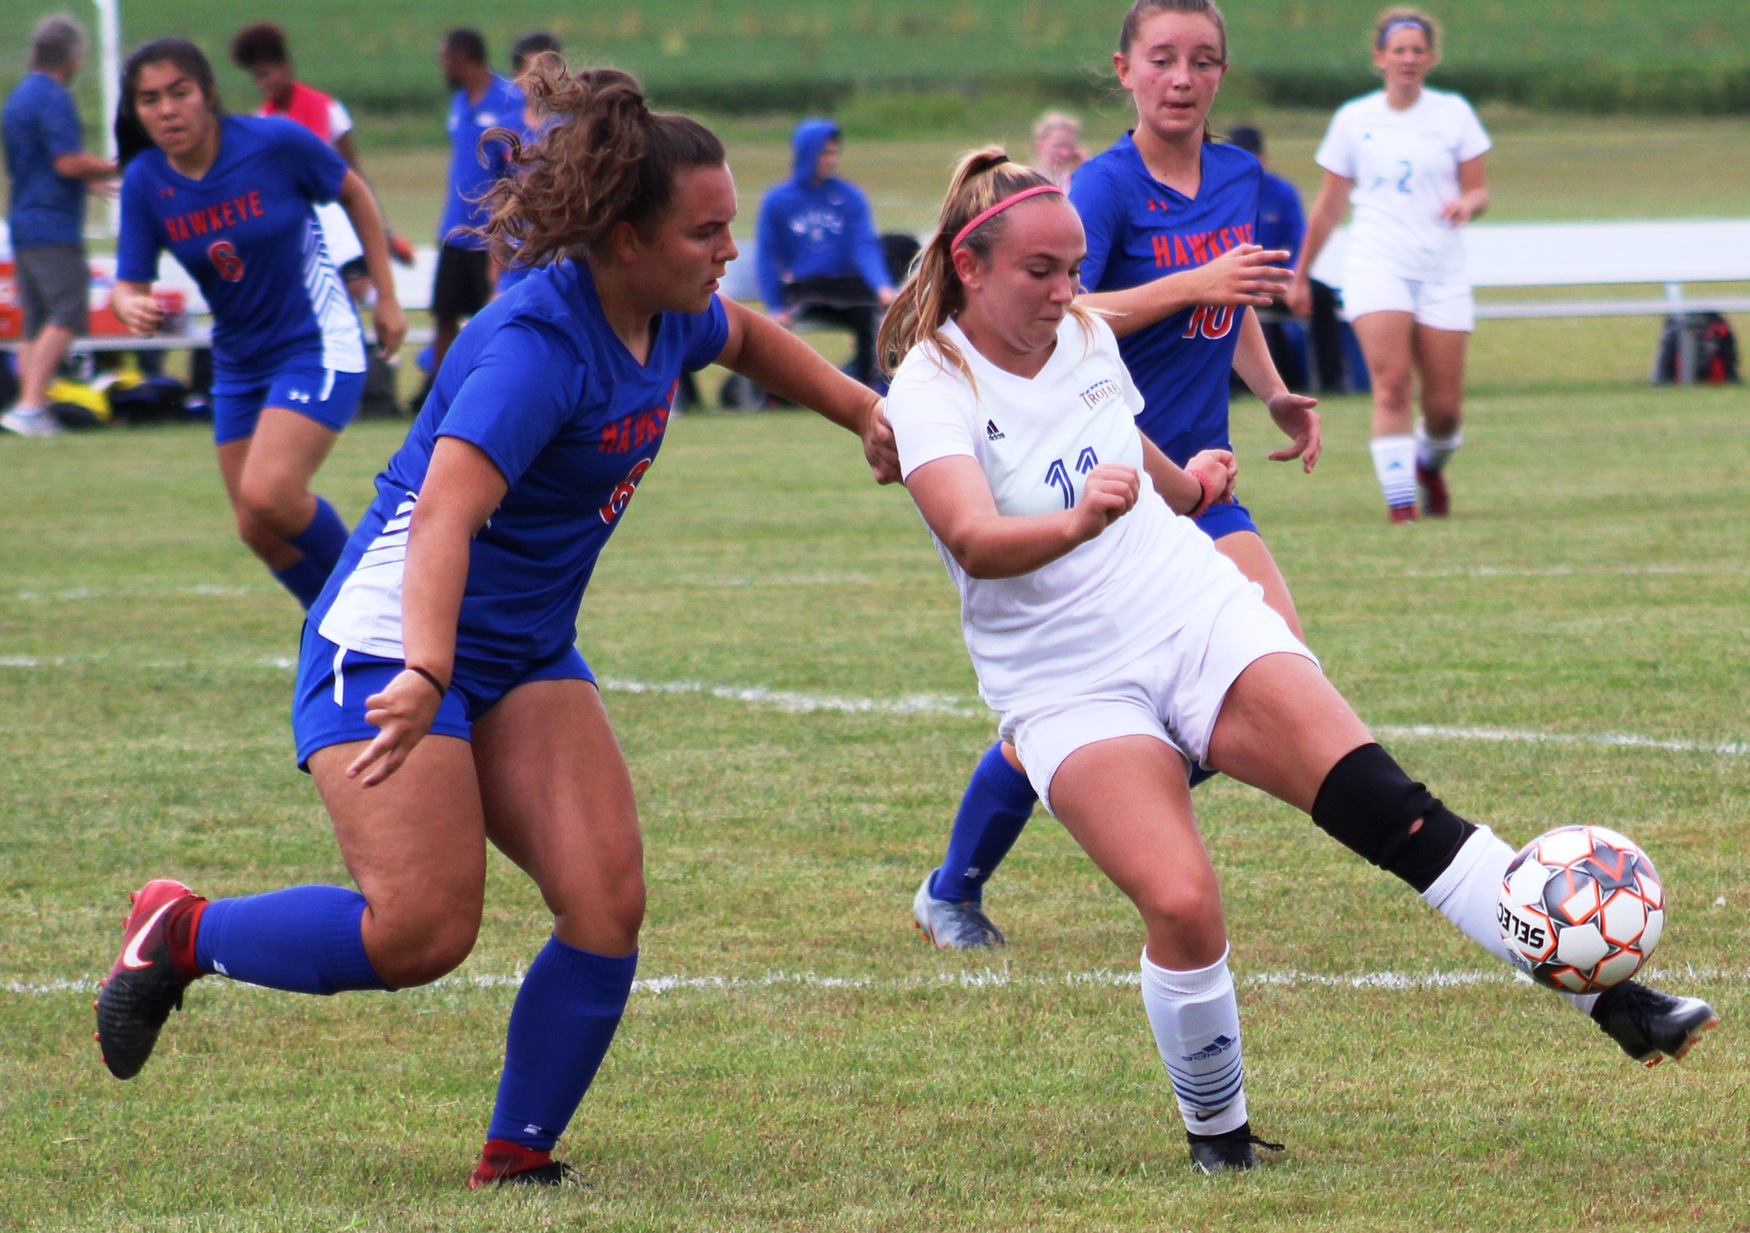 NIACC's Sophia Gebl kicks the ball in the first half of Saturday's contest against Hawkeye CC.